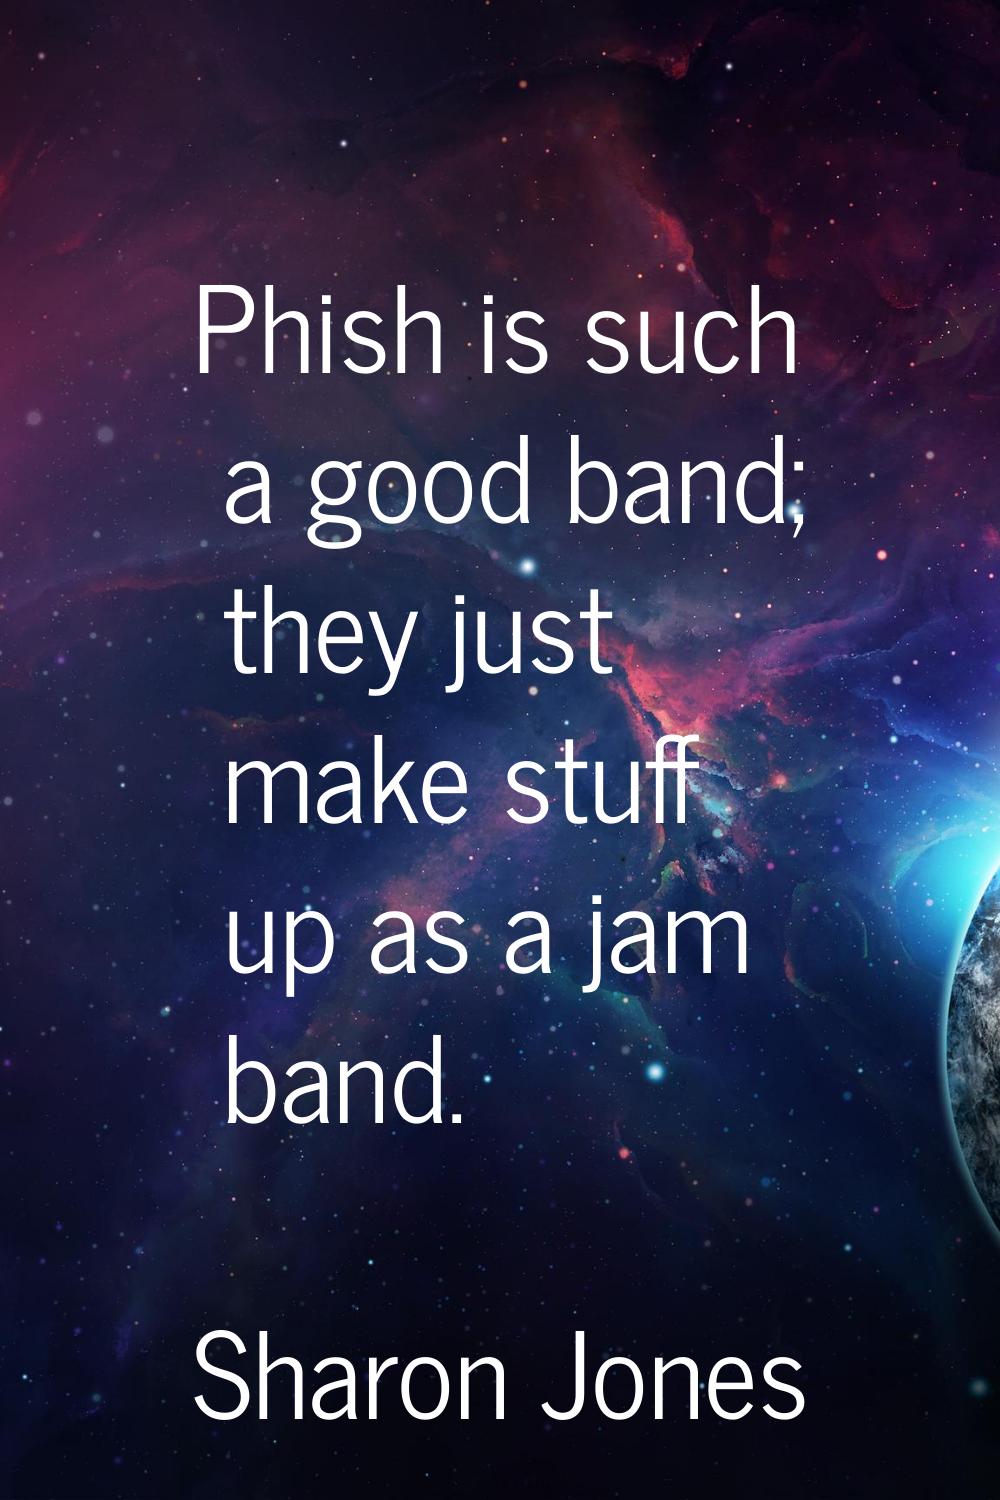 Phish is such a good band; they just make stuff up as a jam band.